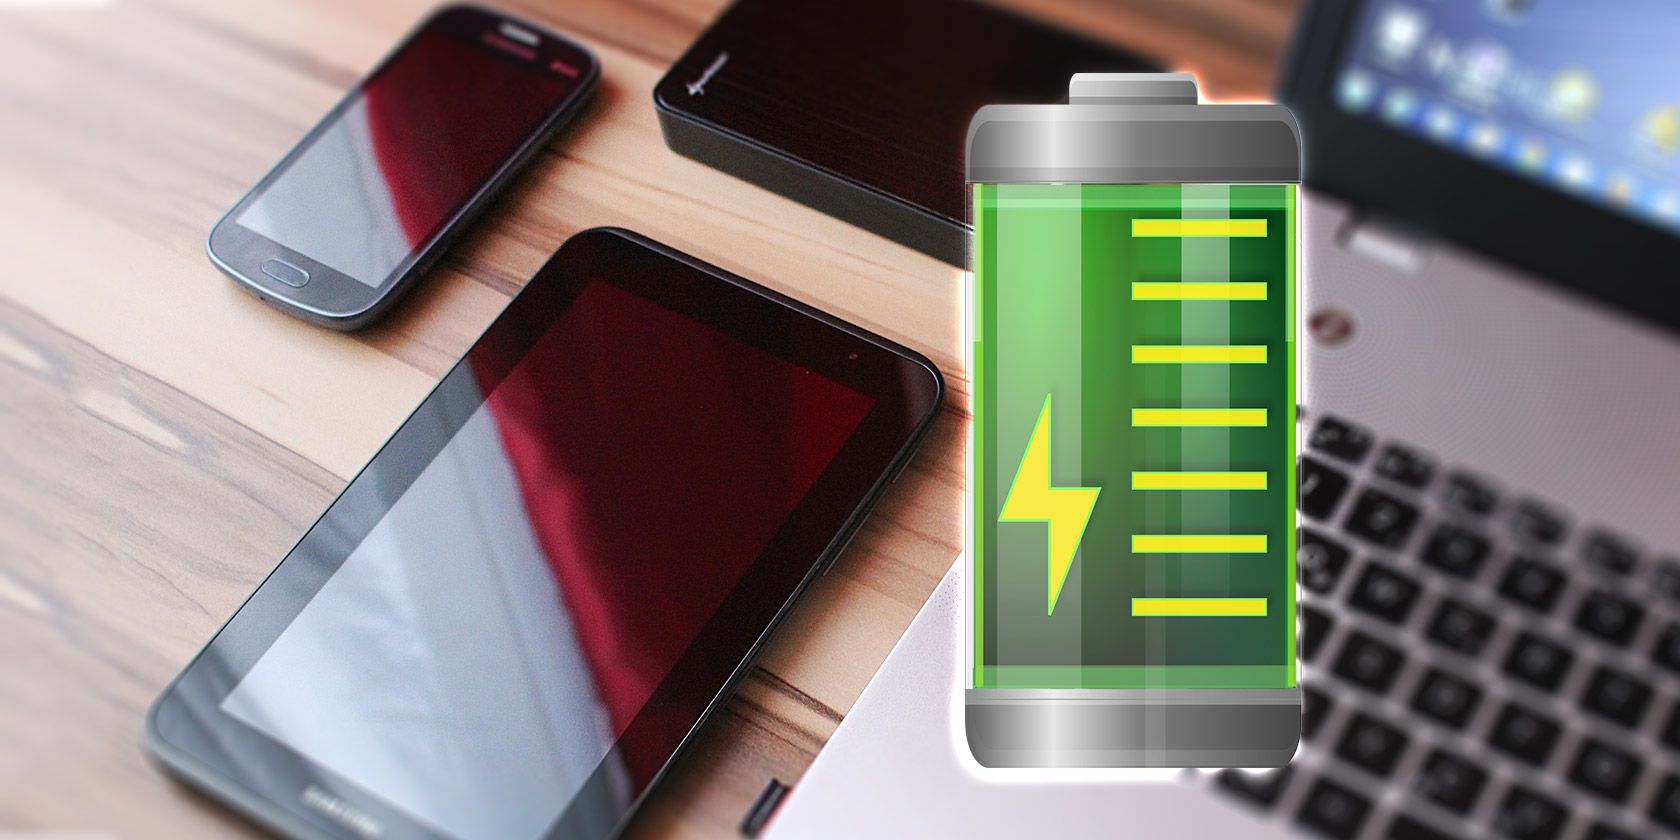 8 Common Misconceptions About Mobile Device Batteries You Need To Know